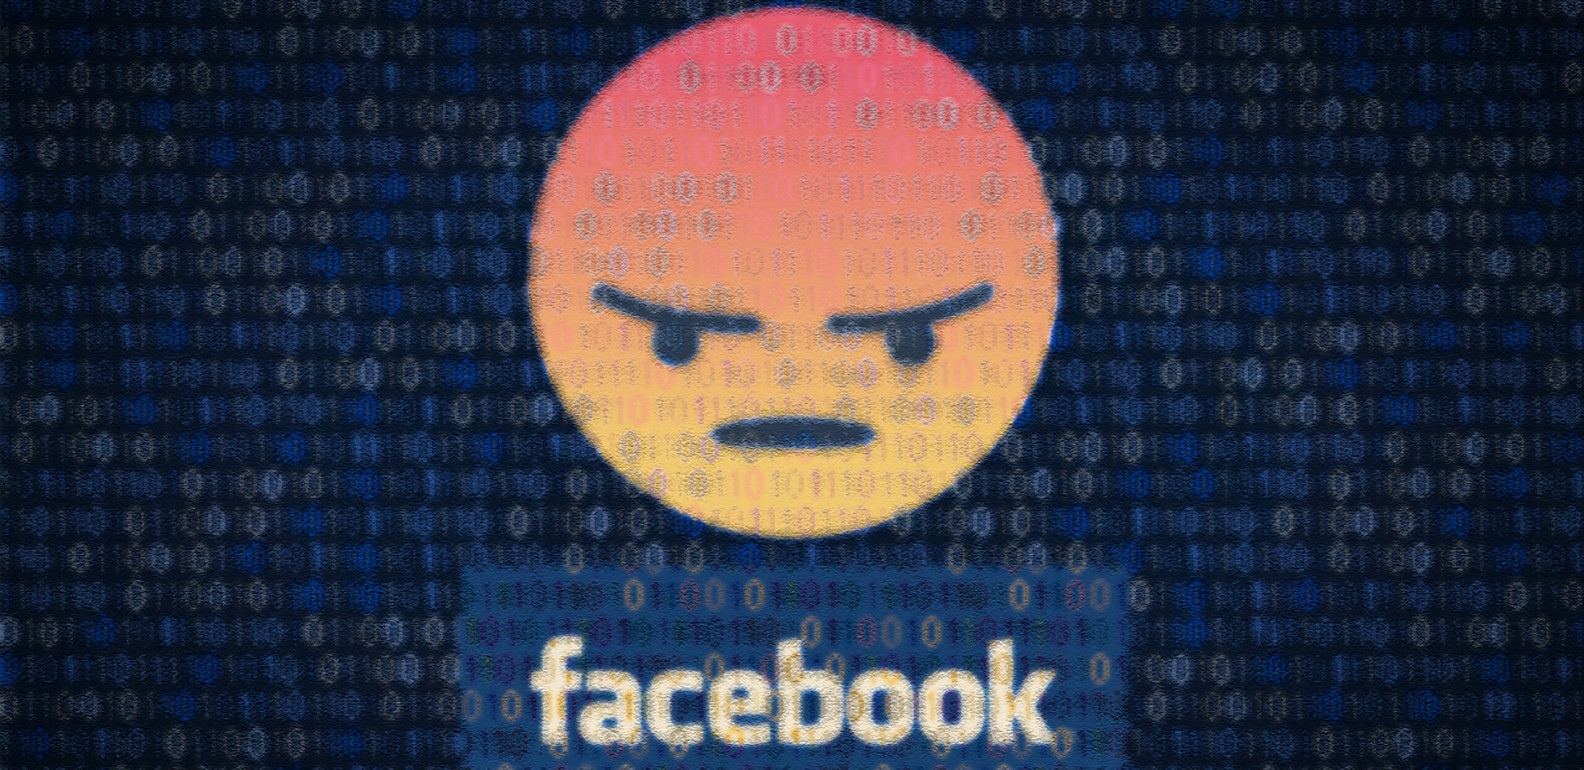 Facebook bans Signal for running ads about Facebook's privacy policy